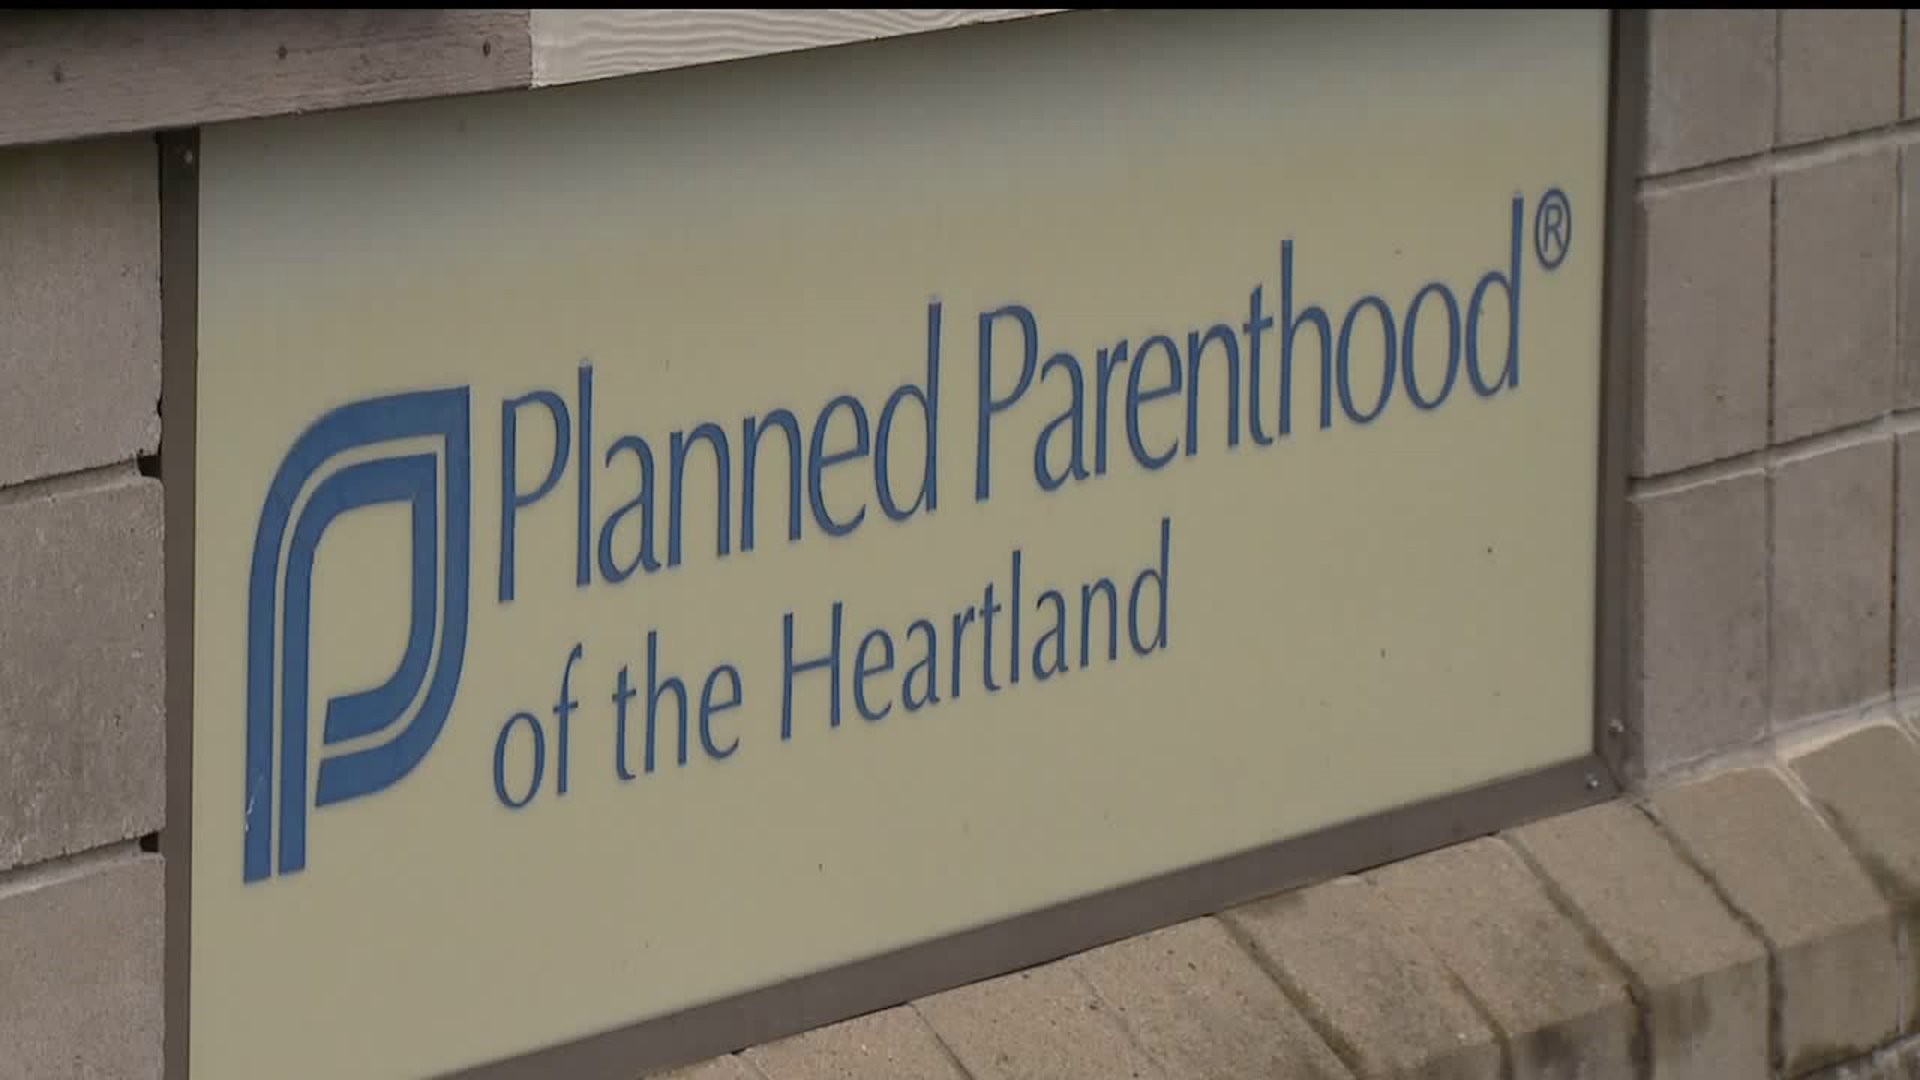 Planned Parenthood update